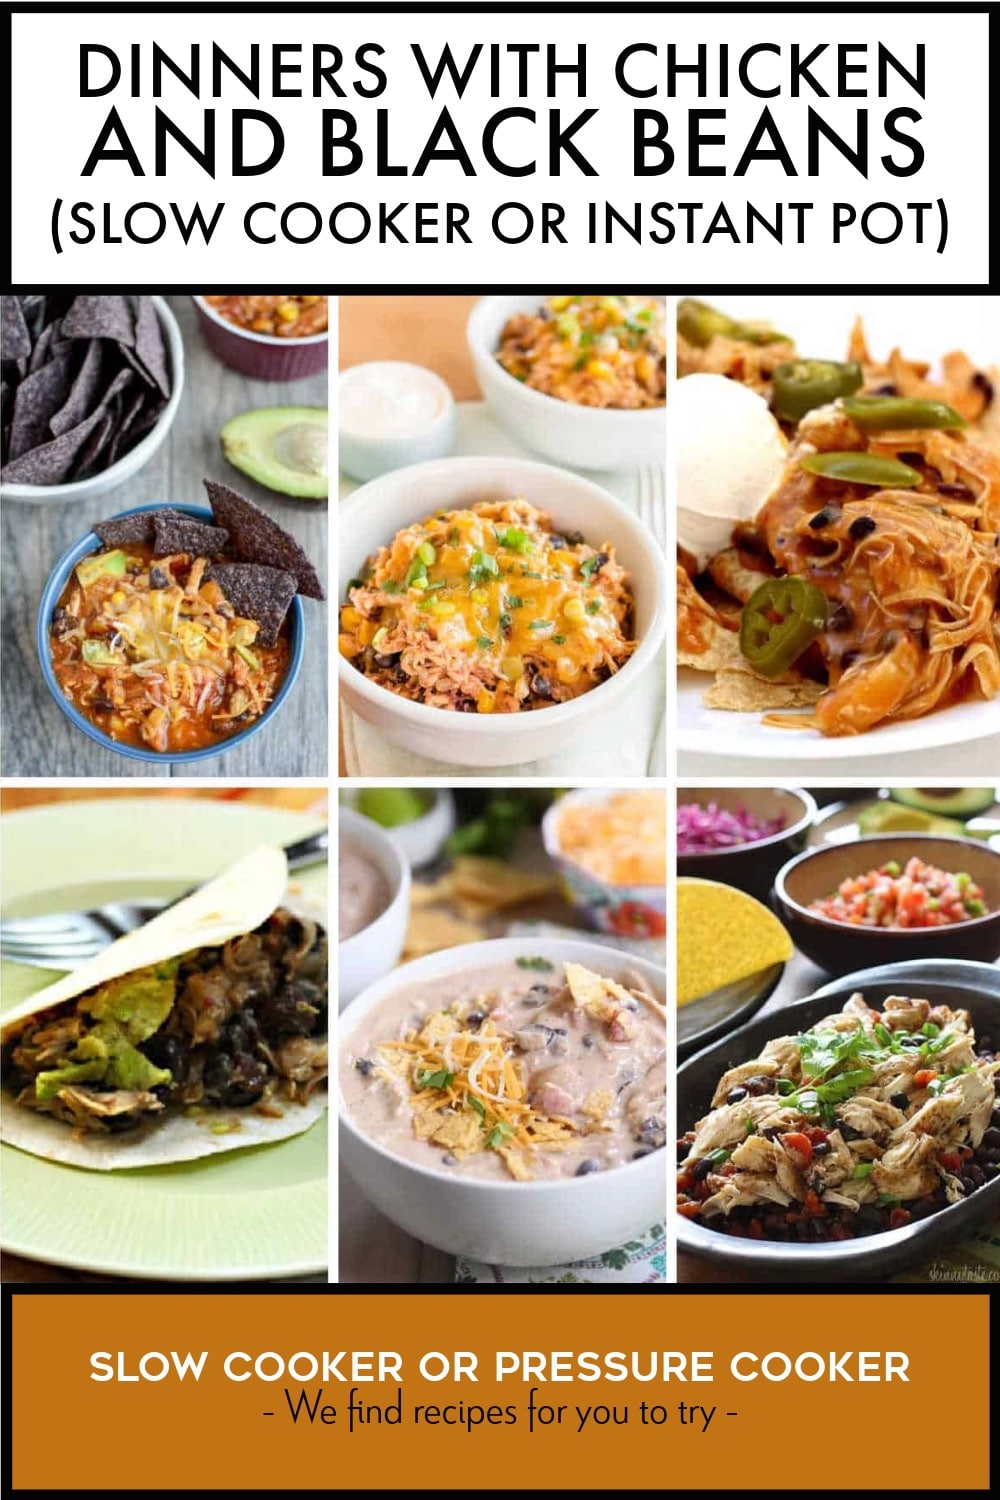 Pinterest image of Dinners with Chicken and Black Beans (Slow Cooker or Instant Pot)